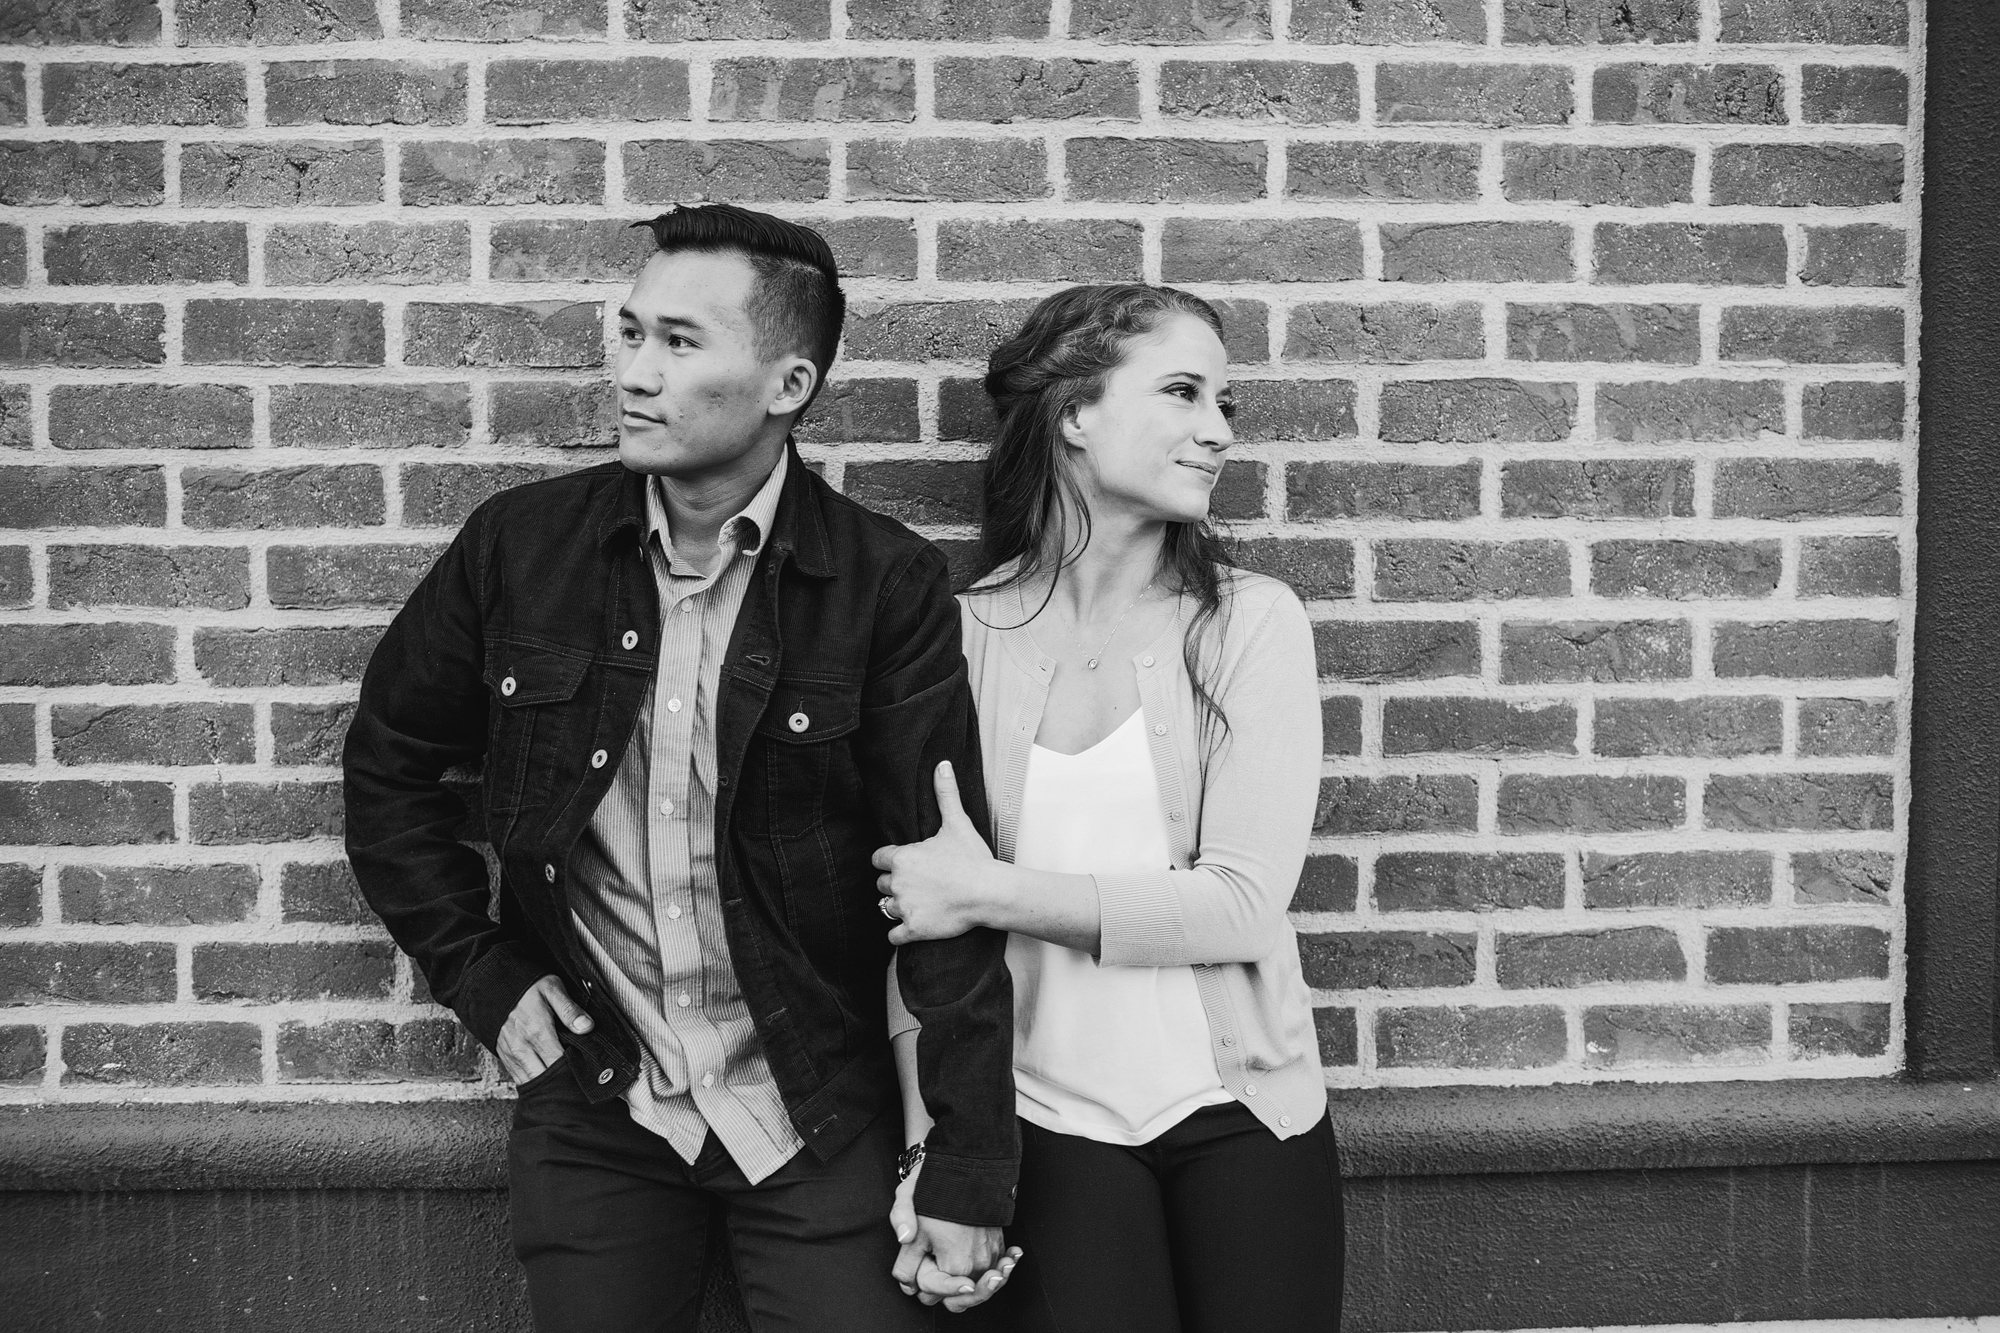 couple holding hands leaning against a brick wall in black and white